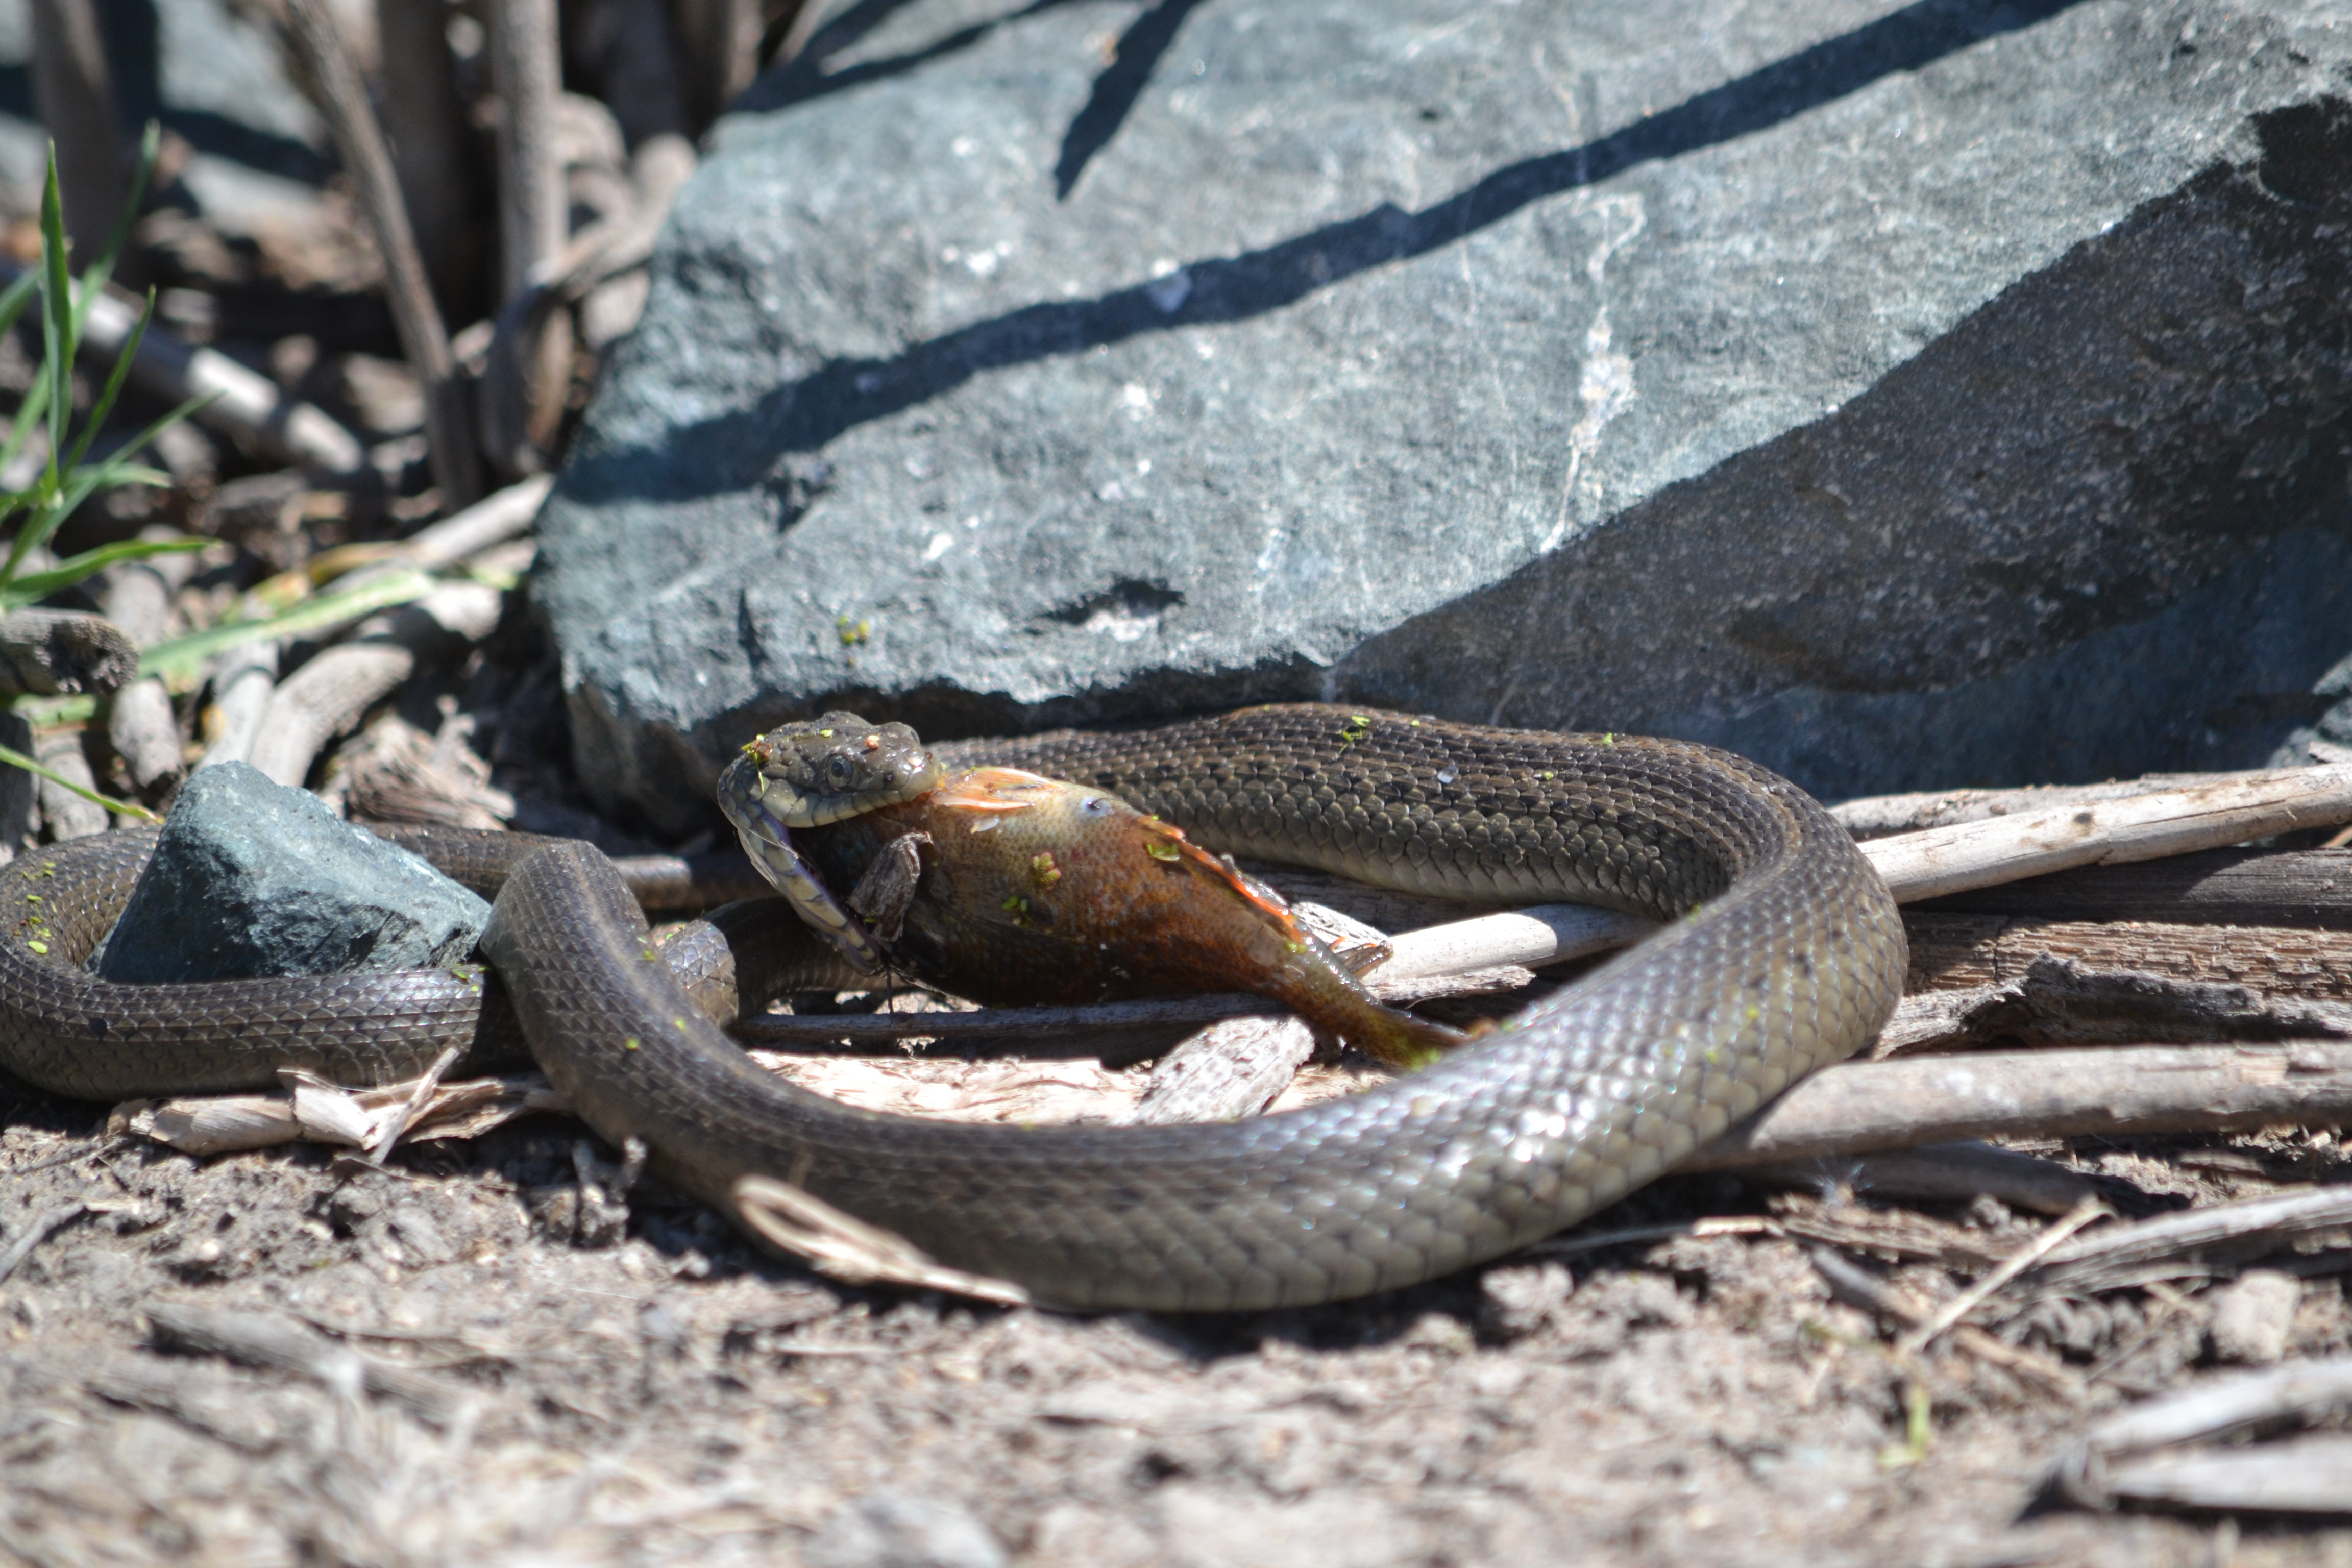 Giant garter snake in the dirt eating a mosquito fish